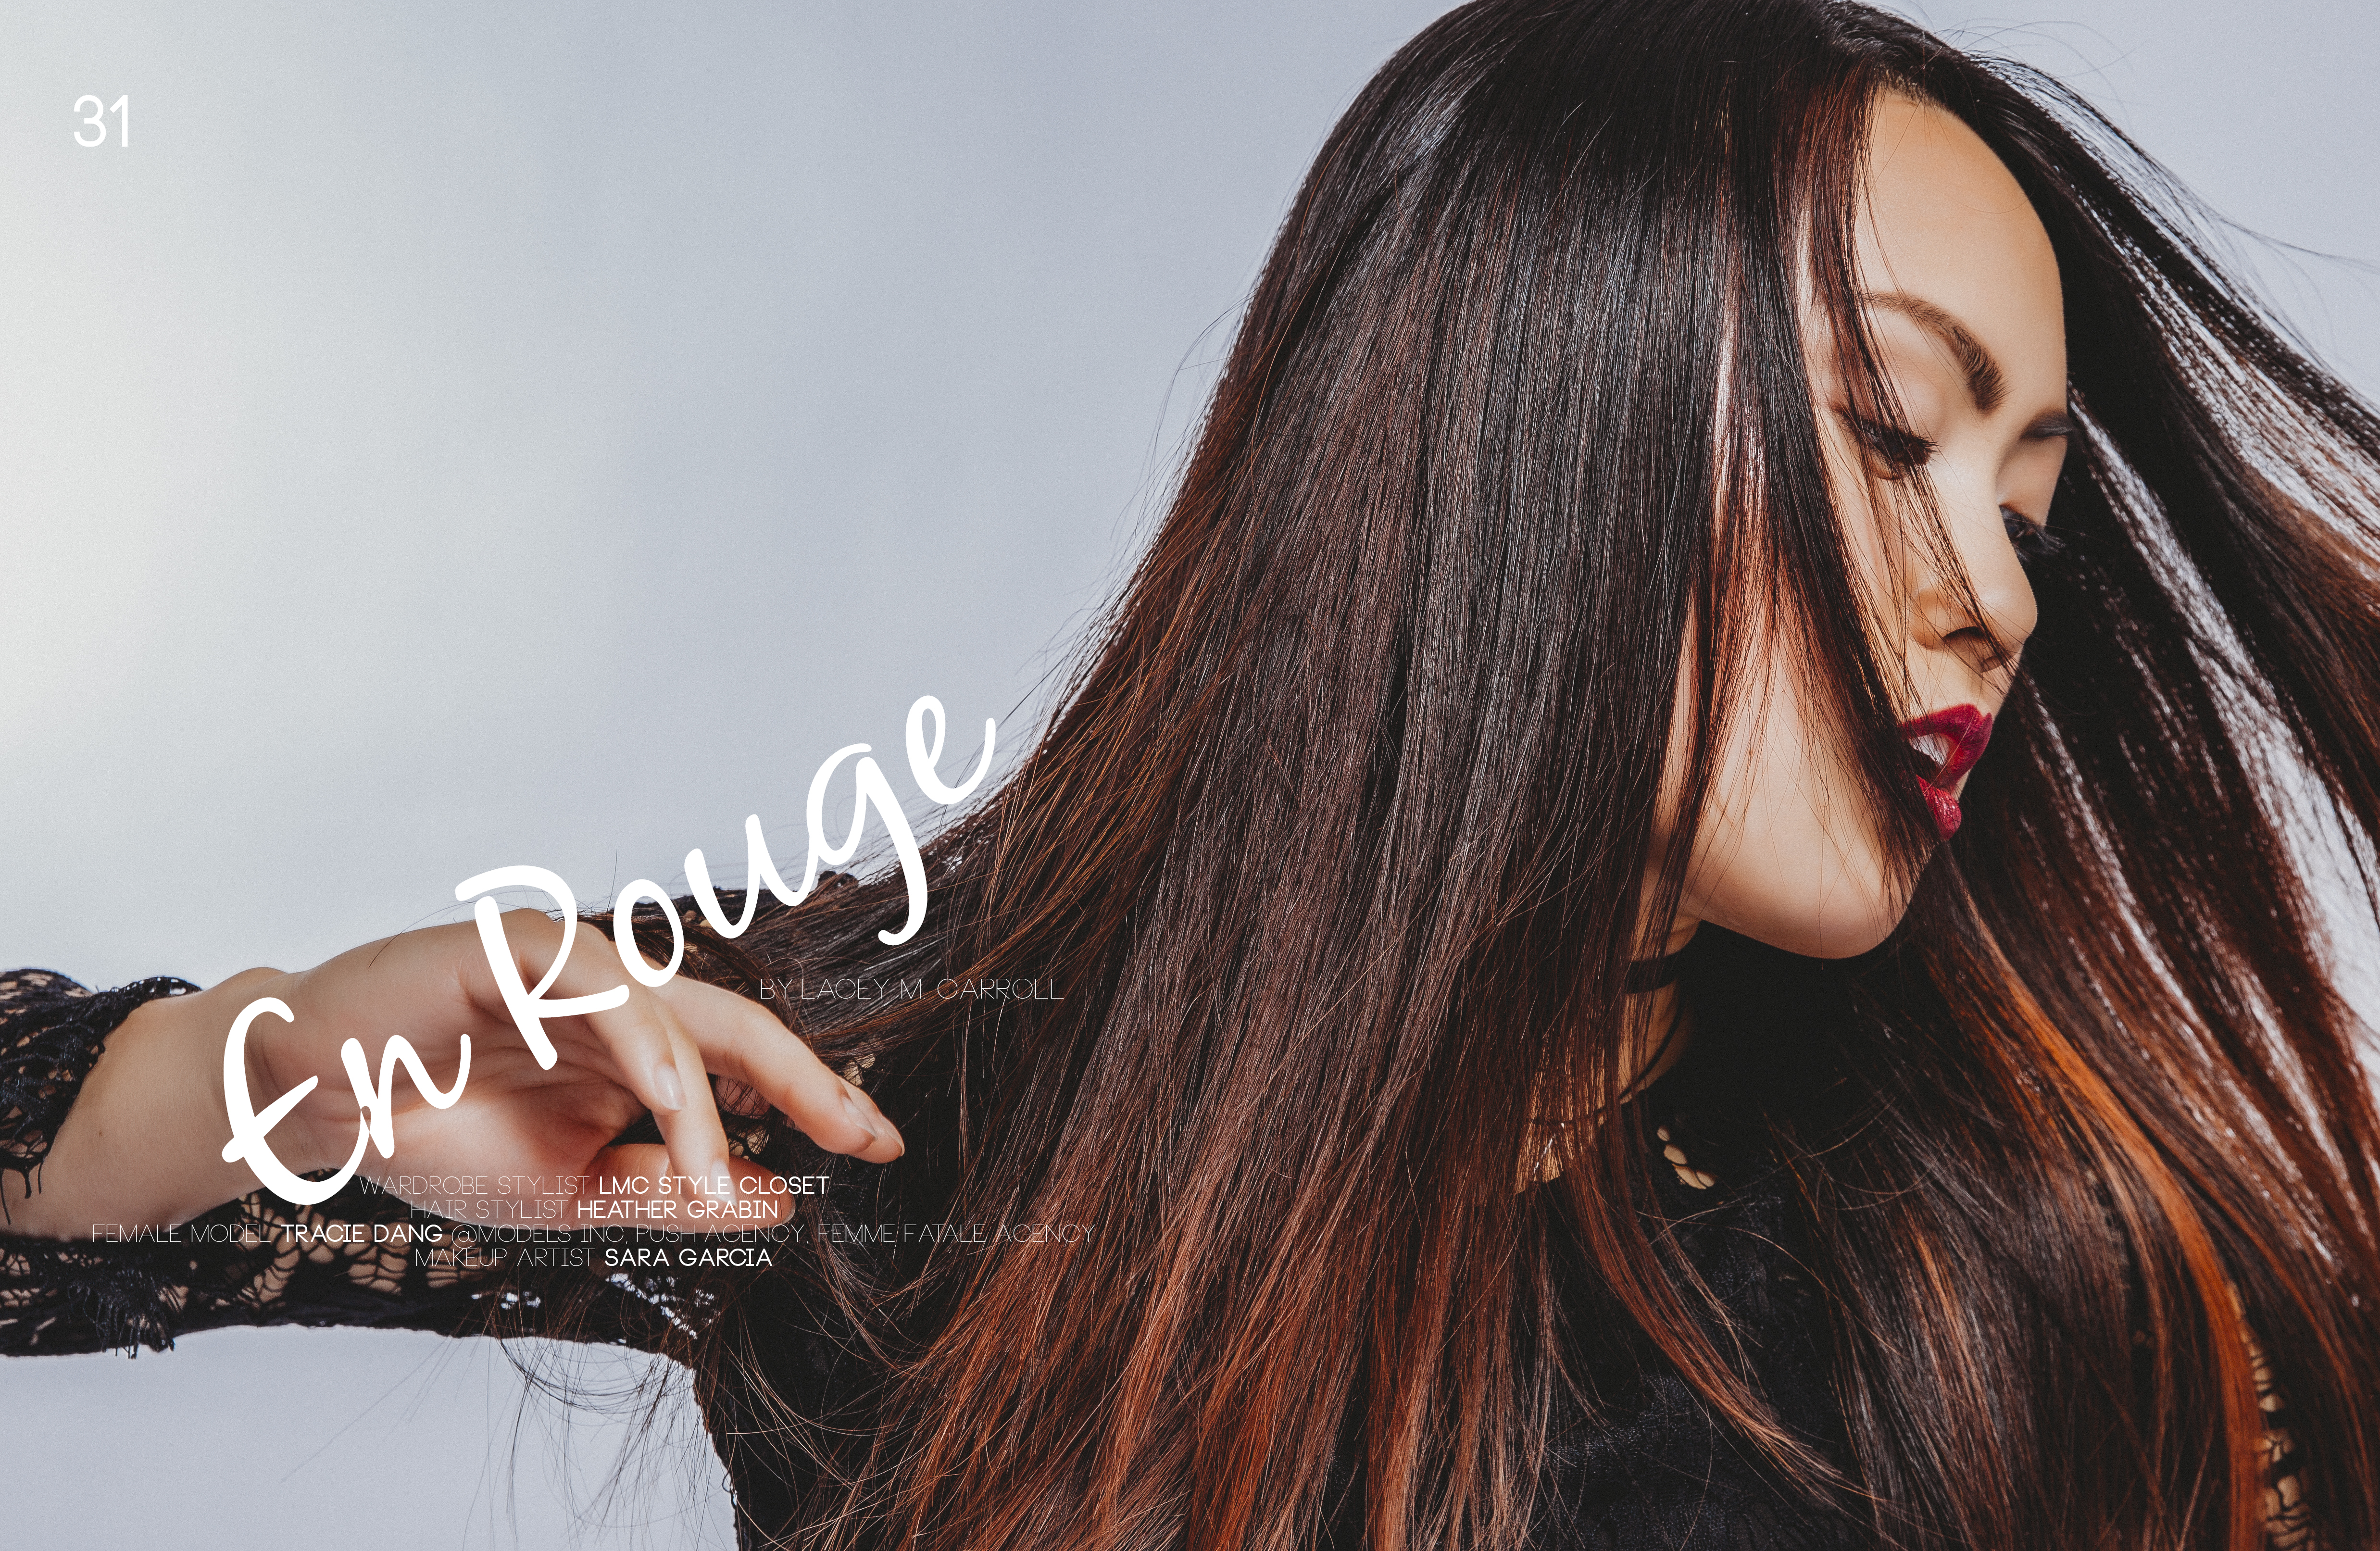 You are currently viewing “En Rouge” Eloque Magazine Publication